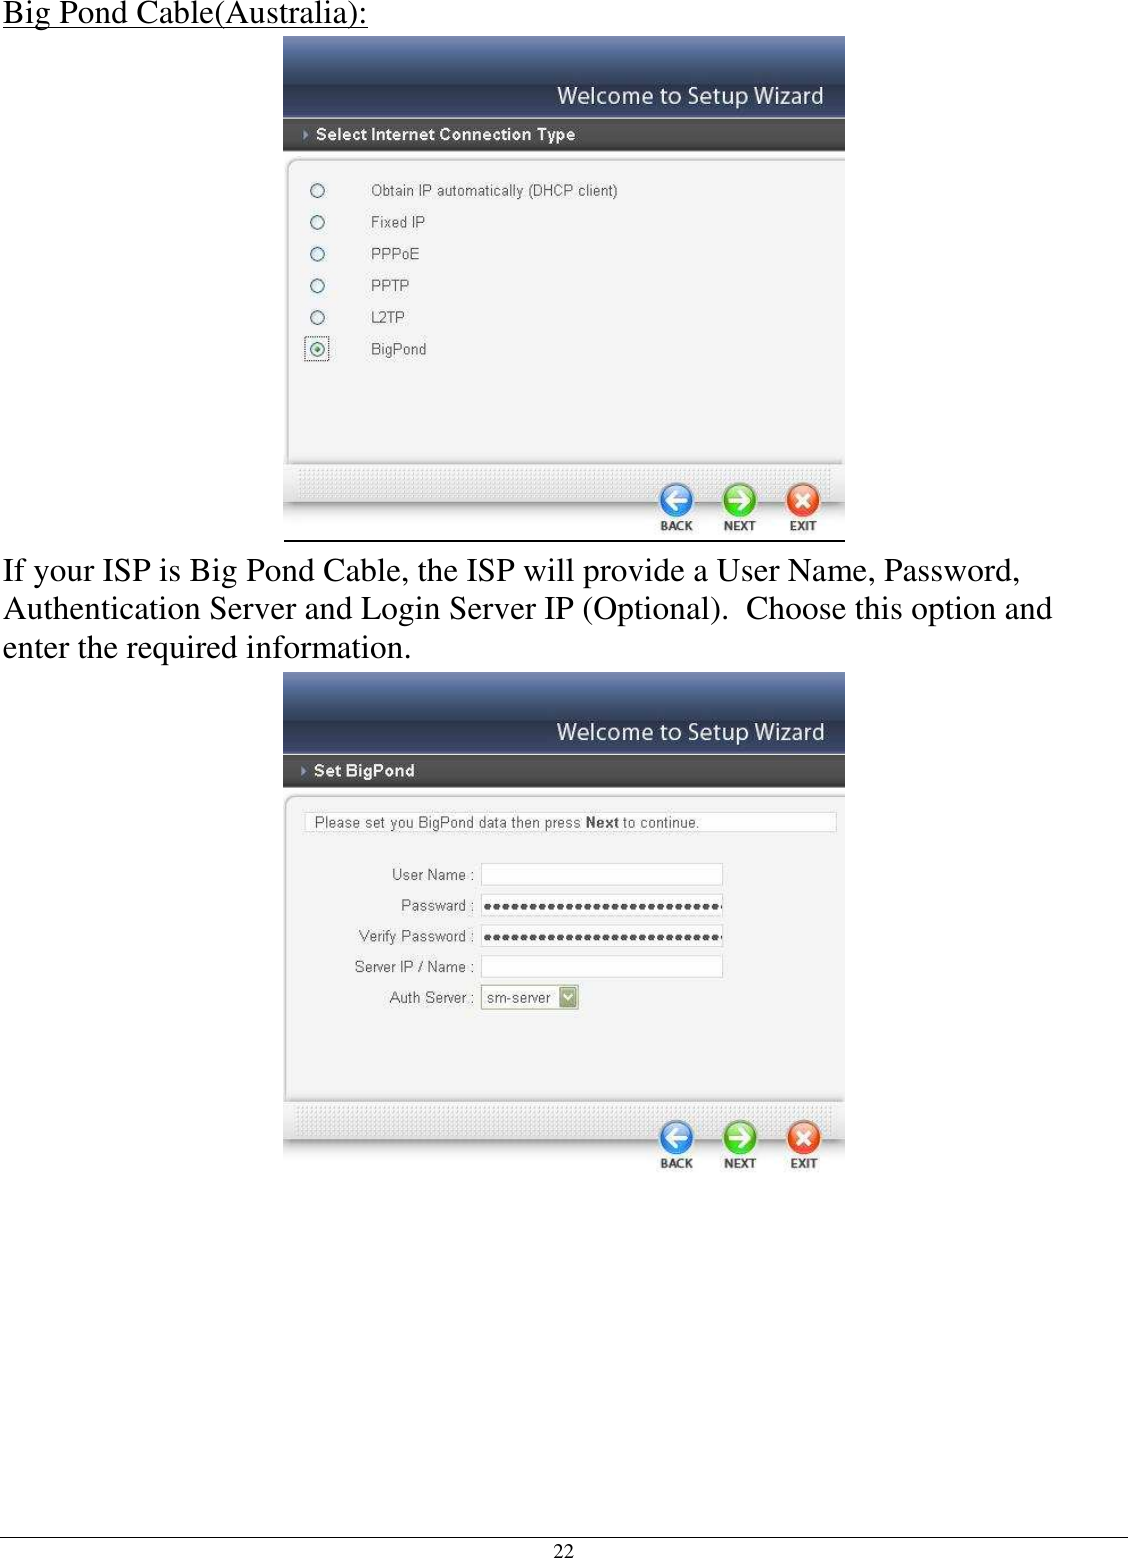 22 Big Pond Cable(Australia):  If your ISP is Big Pond Cable, the ISP will provide a User Name, Password, Authentication Server and Login Server IP (Optional).  Choose this option and enter the required information.  